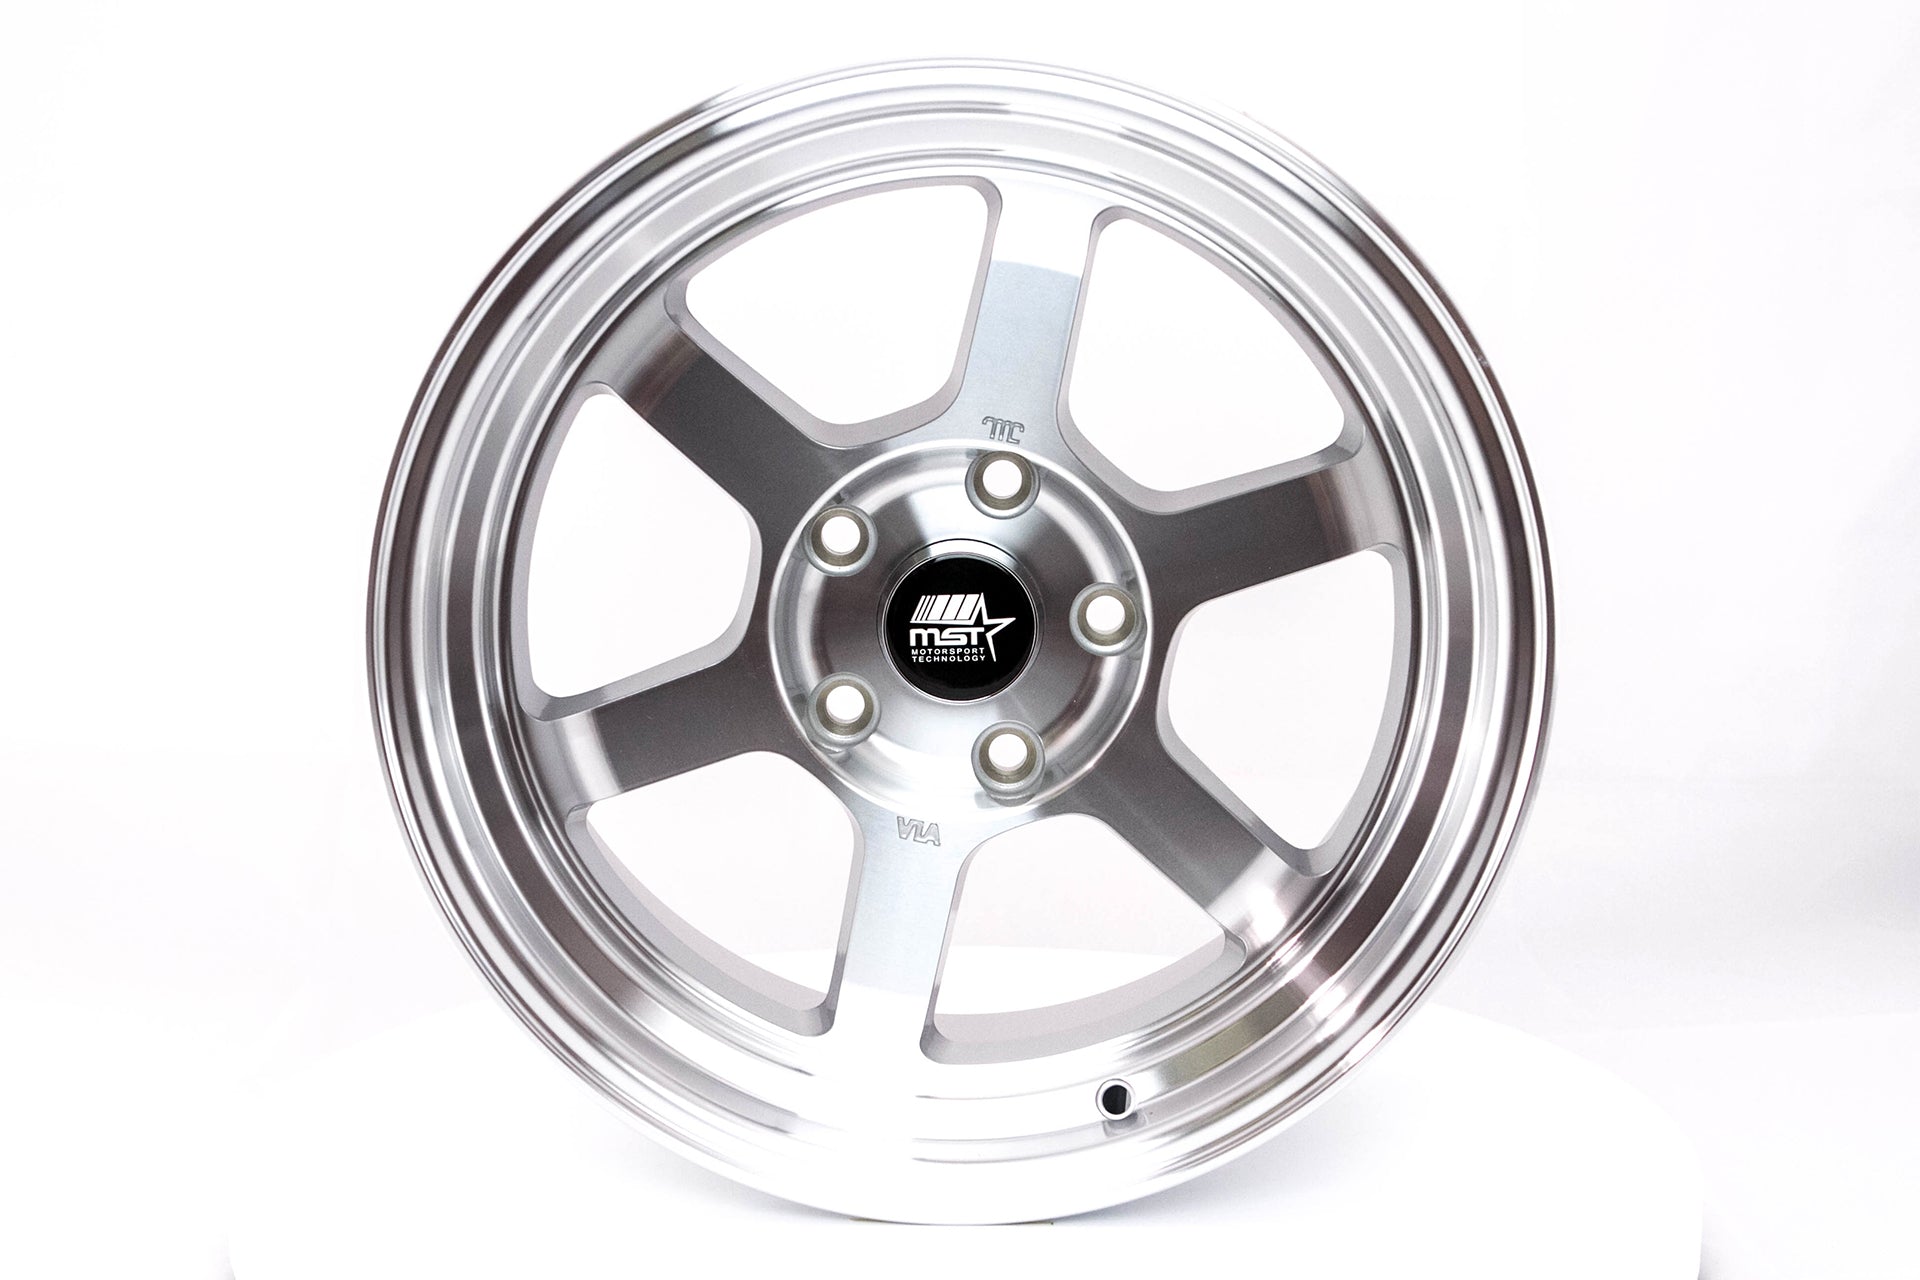 MST WHEELS Time Attack - Machined - 16x8.0 5x114.3 Offset +20